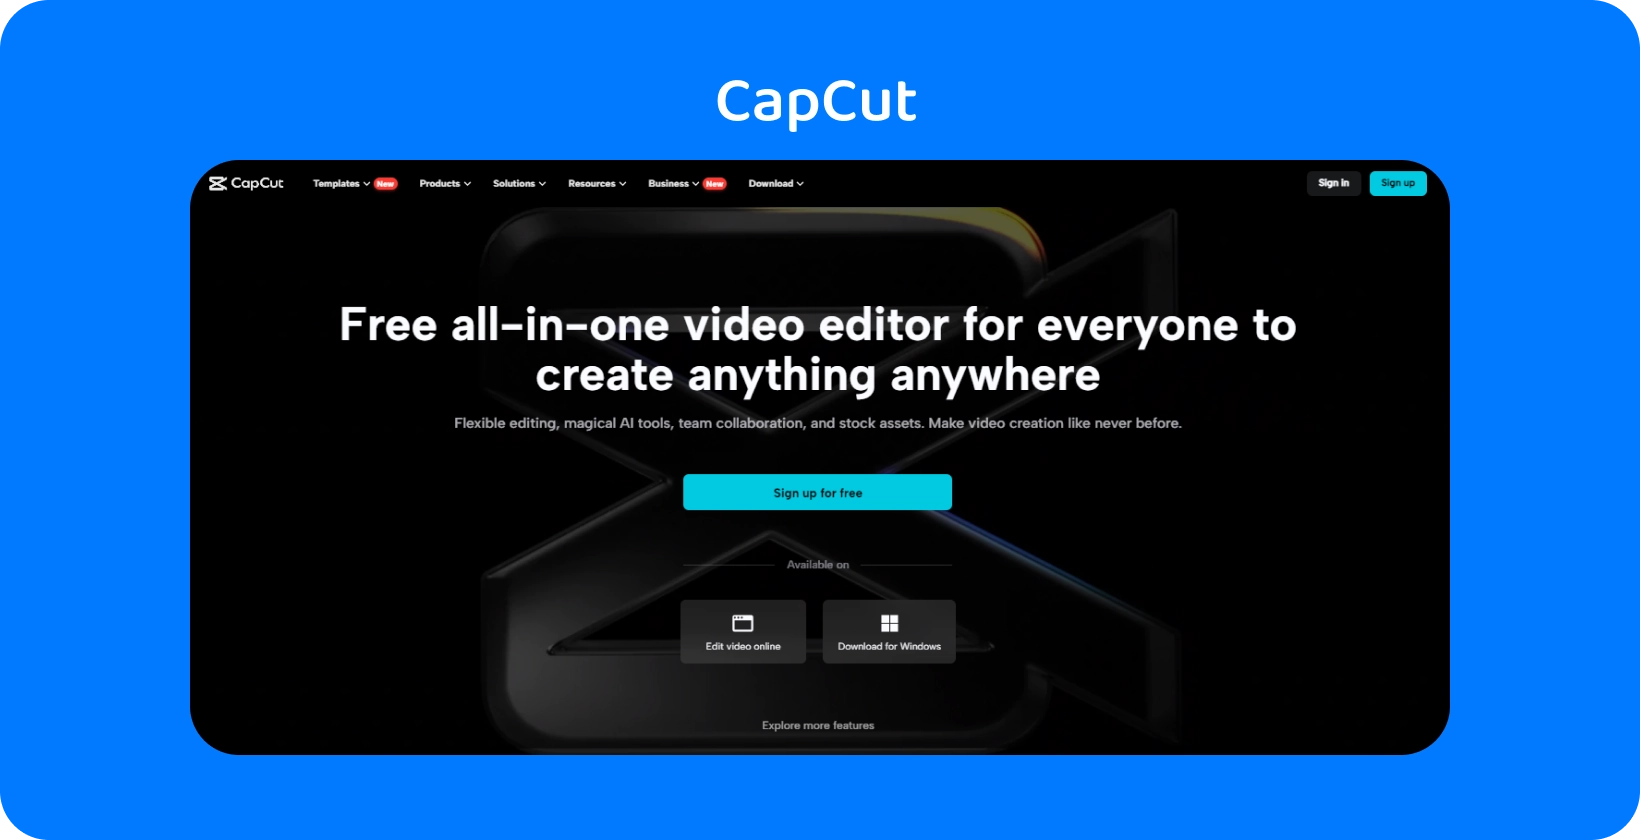 CapCut's homepage showcasing a free, all-in-one video editor for creating content on any device, with a dark and sleek design.
